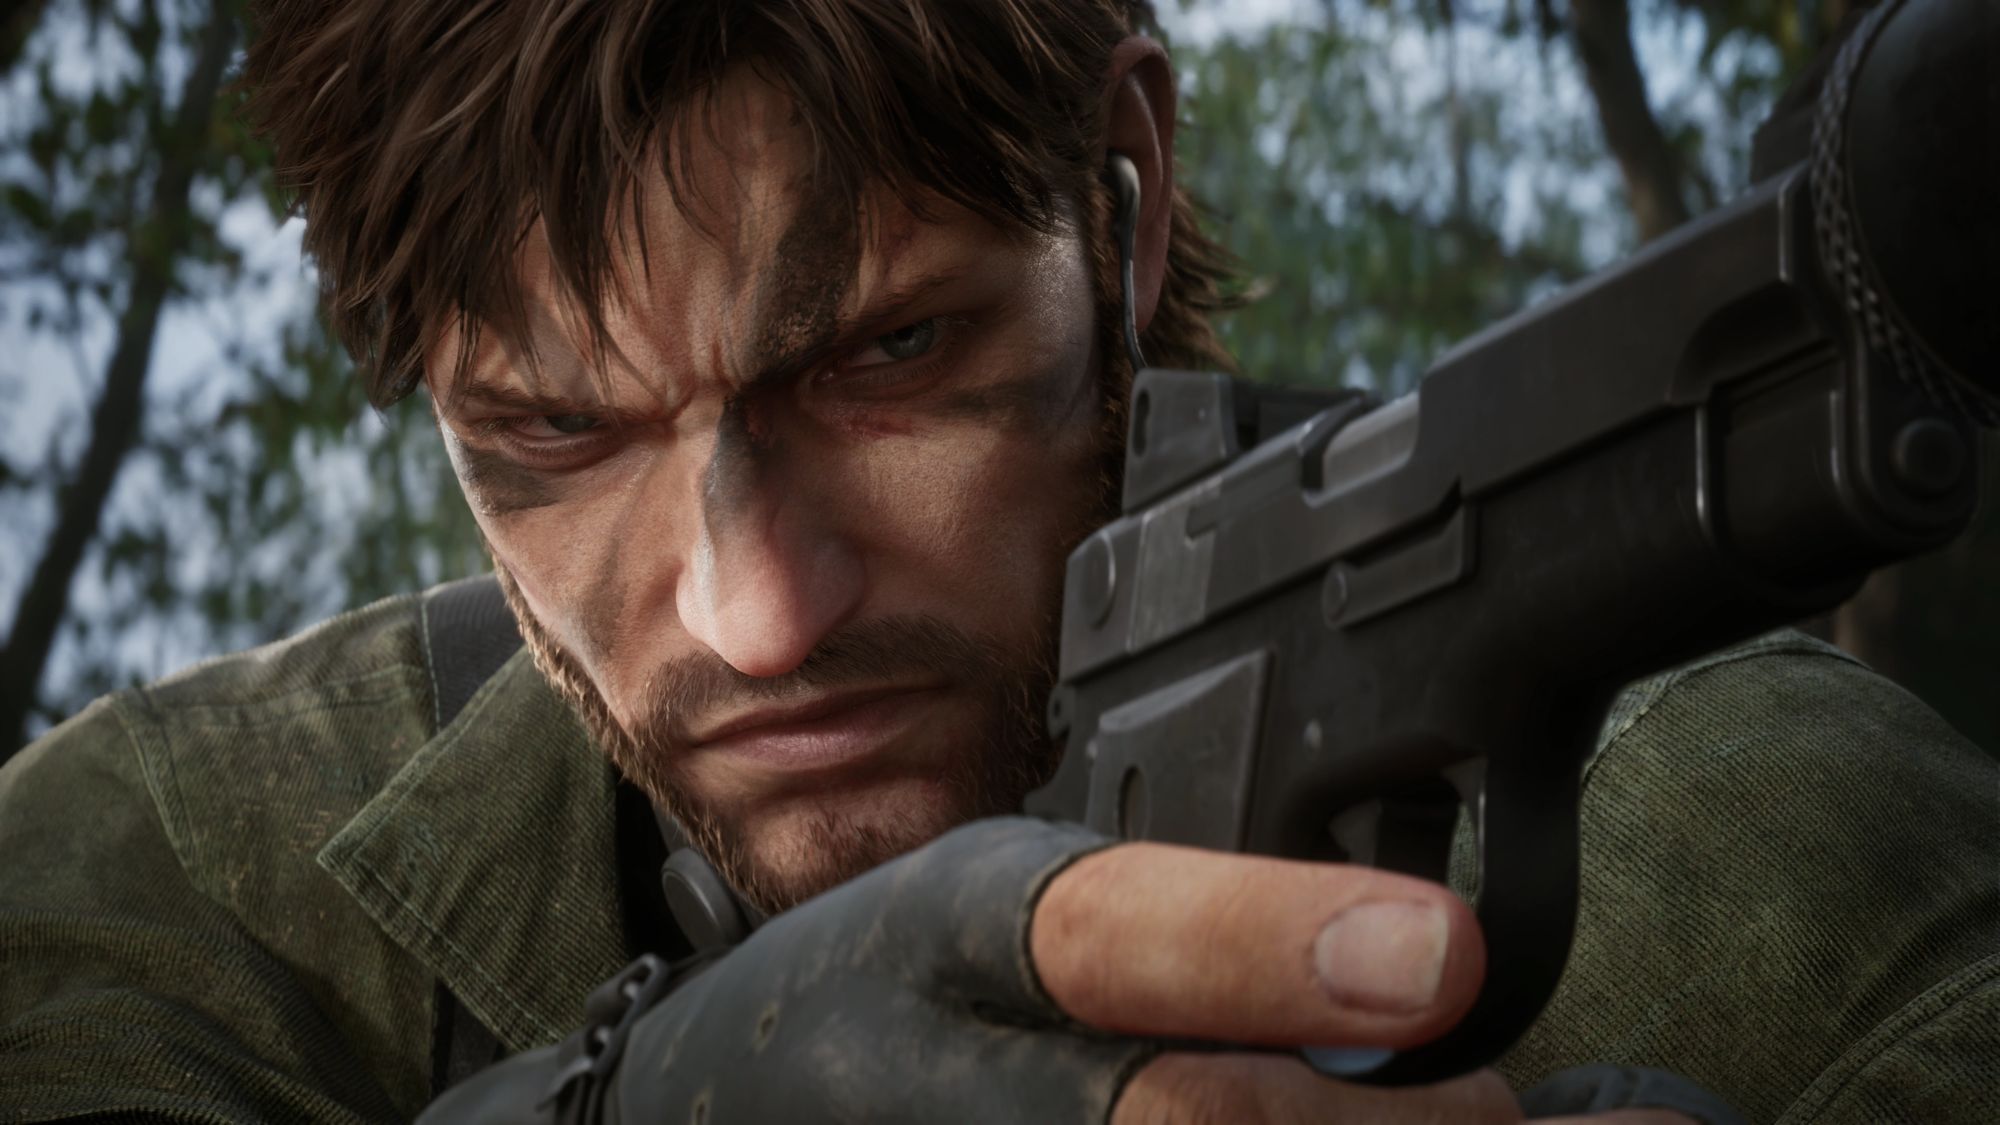 Metal Gear Solid 3 Remake is launching later this year according to GameStop